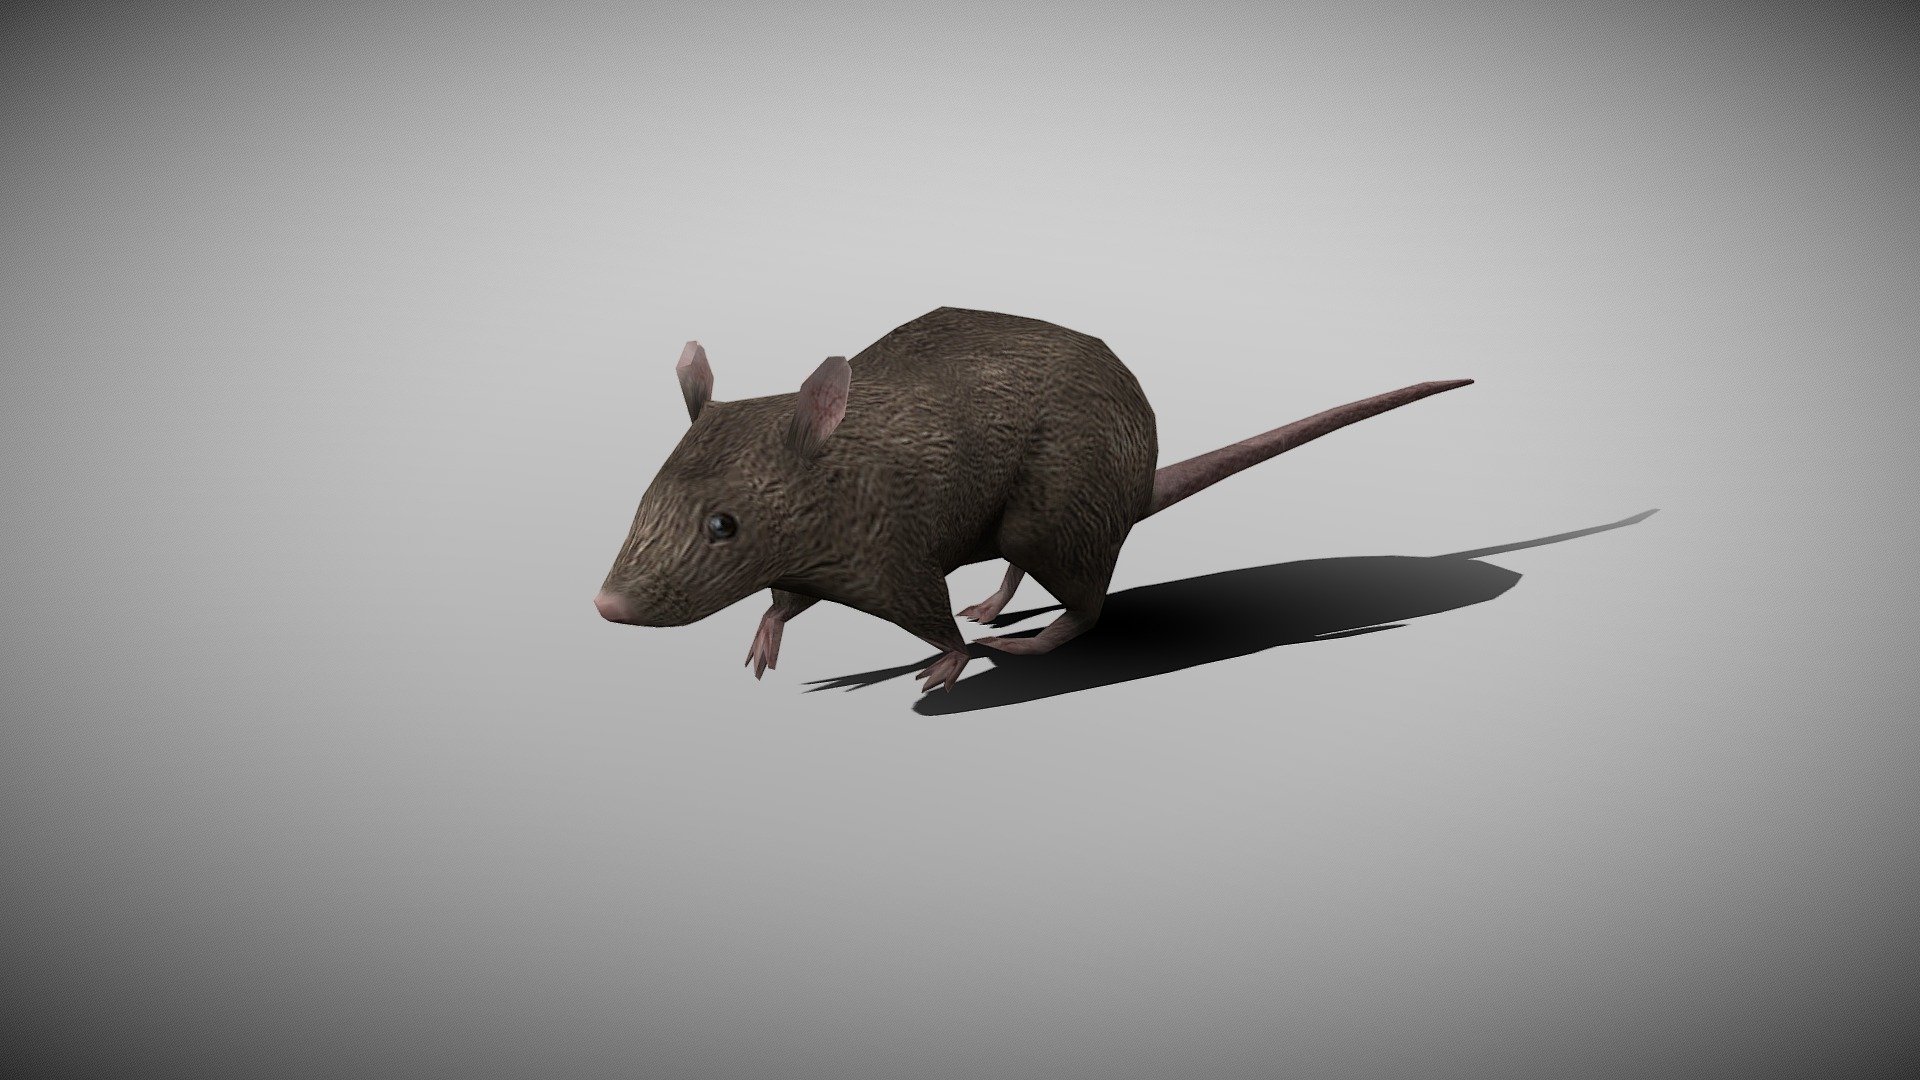 WATCH =
3D Rat Realistic Character

PACKAGE INCLUDE

High quality model, correctly scaled for an accurate representation of the original object
High Detailed Photorealistic Lion, completely UVmapped and smoothable
Model is built to real-world scale.
Many different format like blender, fbx, obj, iclone, dae
Separate Loopable Animations
Ready for animation
High Quality materials and textures
Triangles = 950
Vertices = 477
Edges = 1425
Faces = 950

ANIMATIONS

Idle
Idle 2
Walk
Walk Fast
Run
Eat
+Many different 3d Print Poses

NOTE

GIVE CREDIT BILAL CREATION PRODUCTION
SUBSCRIBE YOUTUBE CHANNEL = https://www.youtube.com/BilalCreation/playlists
FOLLOW OUR STORE = https://sketchfab.com/bilalcreation/models
LIKE AND GIVE FEEDBACK ON THE MODEL

CONTACT US                 =  https://sites.google.com/view/bilalcreation/contact-us
ORDER  DONATION   =  https://sites.google.com/view/bilalcreation/order - RAT ANIMATED - Buy Royalty Free 3D model by Bilal Creation Production (@bilalcreation) 3d model